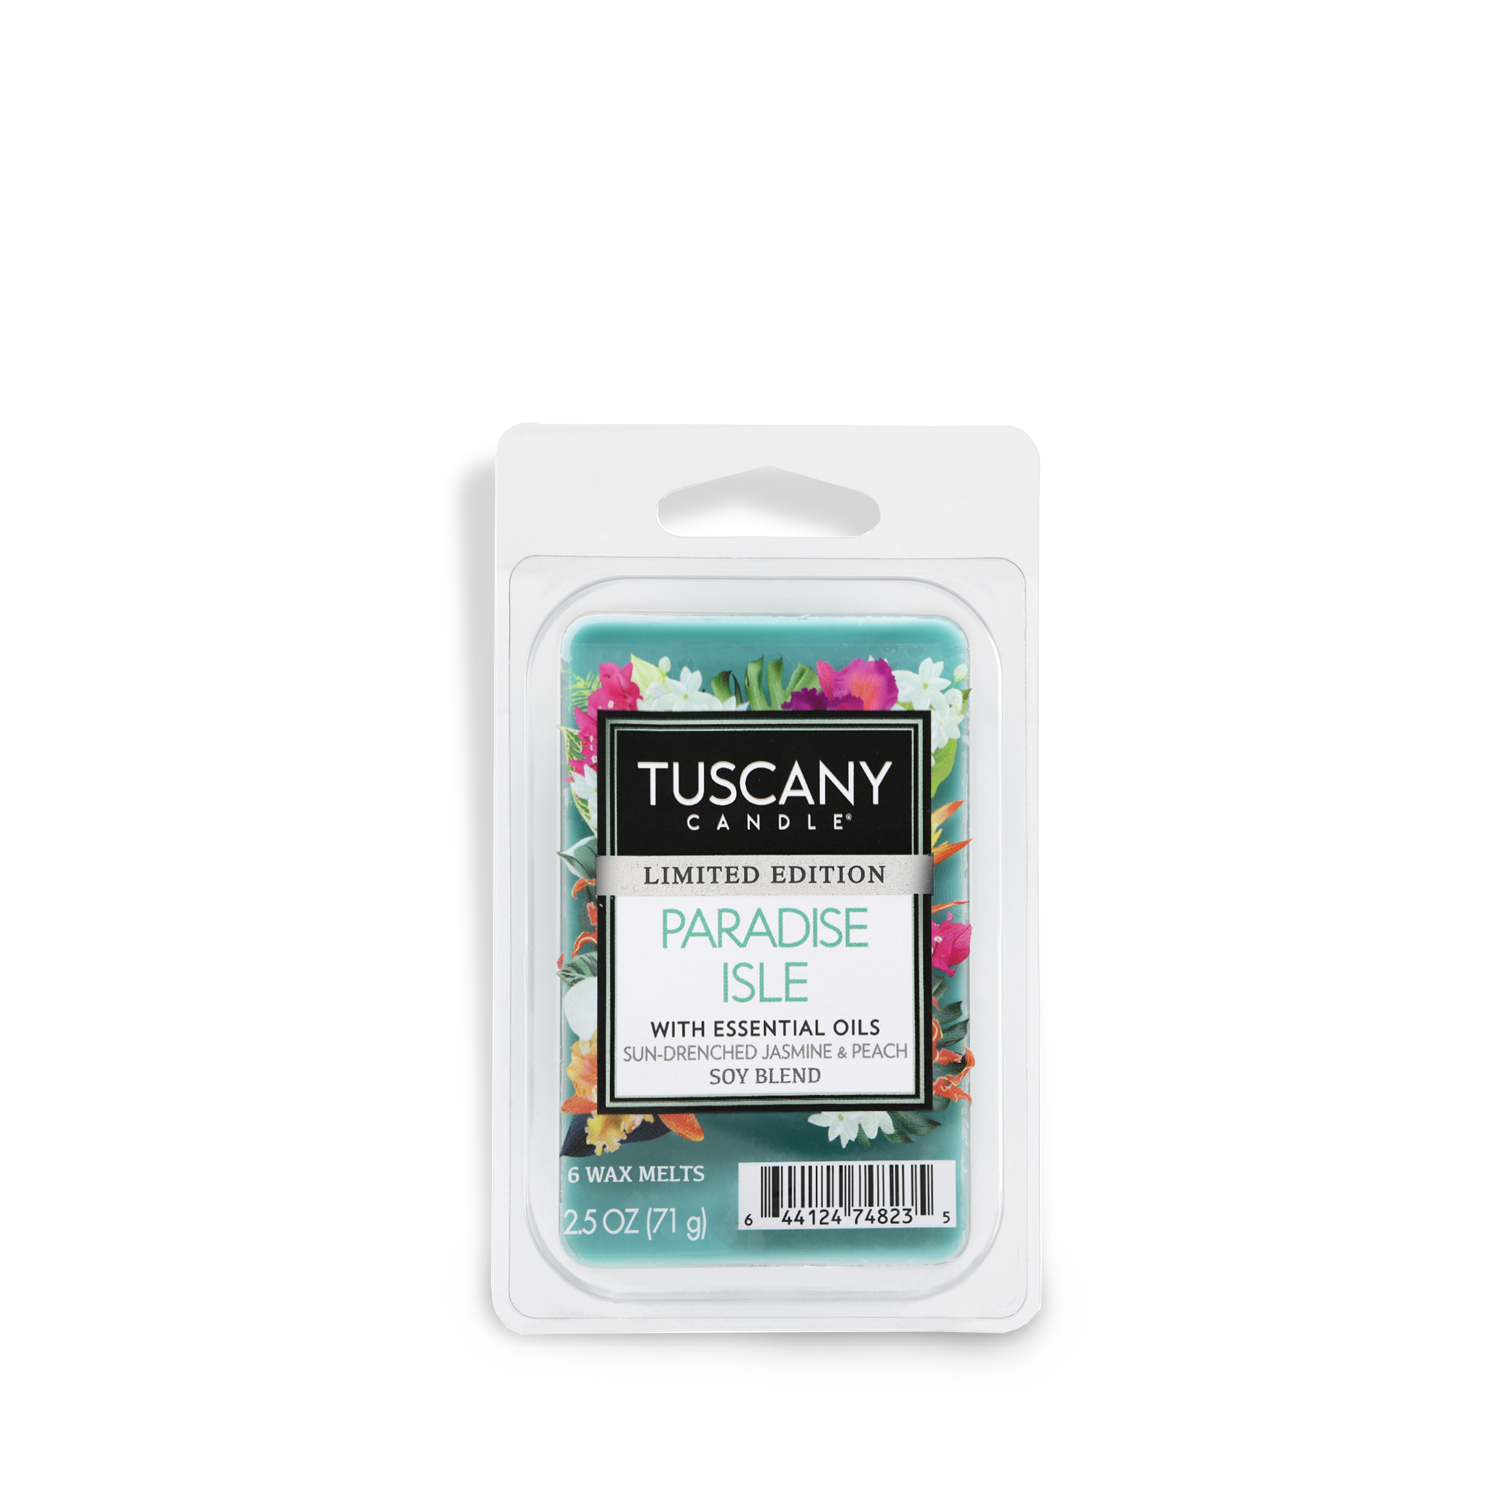 Indulge in the calming aroma of jasmine with our Tuscany Candle® SEASONAL Paradise Isle Scented Wax Melt (2.5 oz).